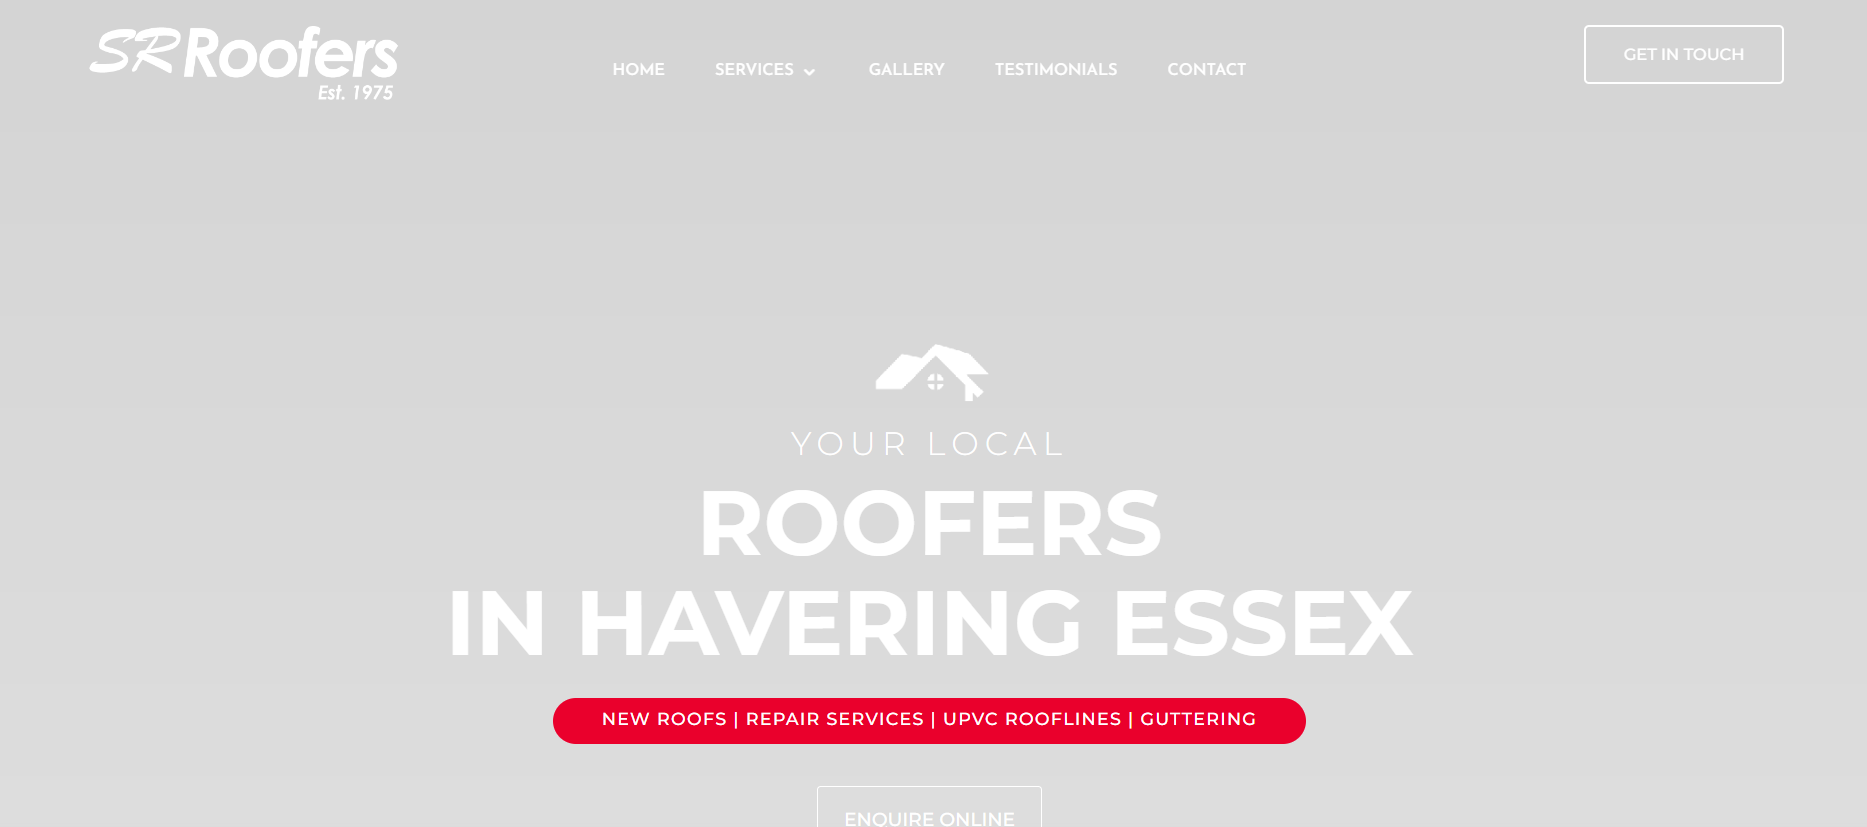 S R Roofers